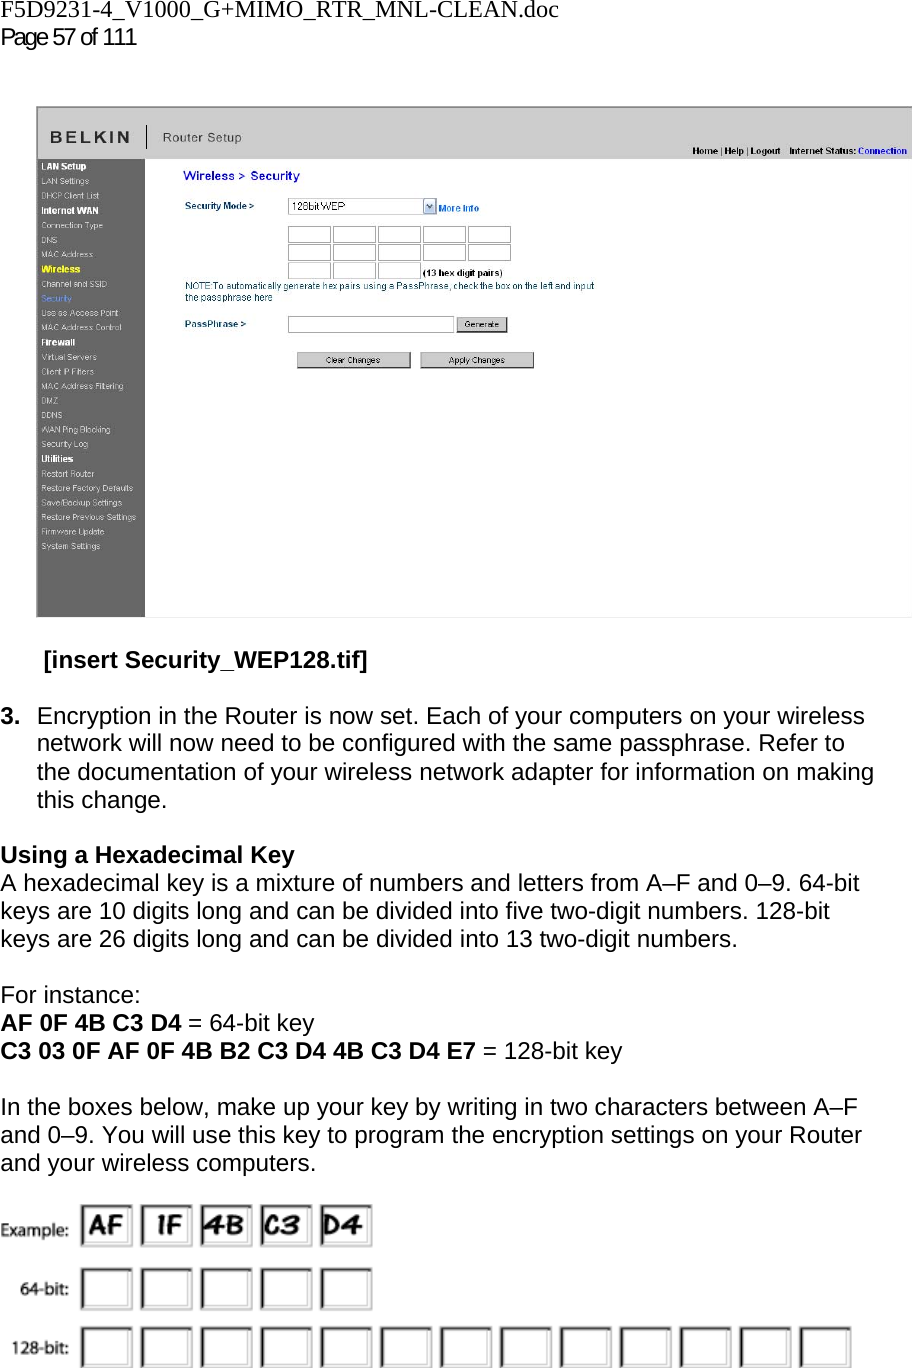 F5D9231-4_V1000_G+MIMO_RTR_MNL-CLEAN.doc  Page 57 of 111      [insert Security_WEP128.tif]  3.  Encryption in the Router is now set. Each of your computers on your wireless network will now need to be configured with the same passphrase. Refer to the documentation of your wireless network adapter for information on making this change.  Using a Hexadecimal Key A hexadecimal key is a mixture of numbers and letters from A–F and 0–9. 64-bit keys are 10 digits long and can be divided into five two-digit numbers. 128-bit keys are 26 digits long and can be divided into 13 two-digit numbers.   For instance: AF 0F 4B C3 D4 = 64-bit key C3 03 0F AF 0F 4B B2 C3 D4 4B C3 D4 E7 = 128-bit key  In the boxes below, make up your key by writing in two characters between A–F and 0–9. You will use this key to program the encryption settings on your Router and your wireless computers.   